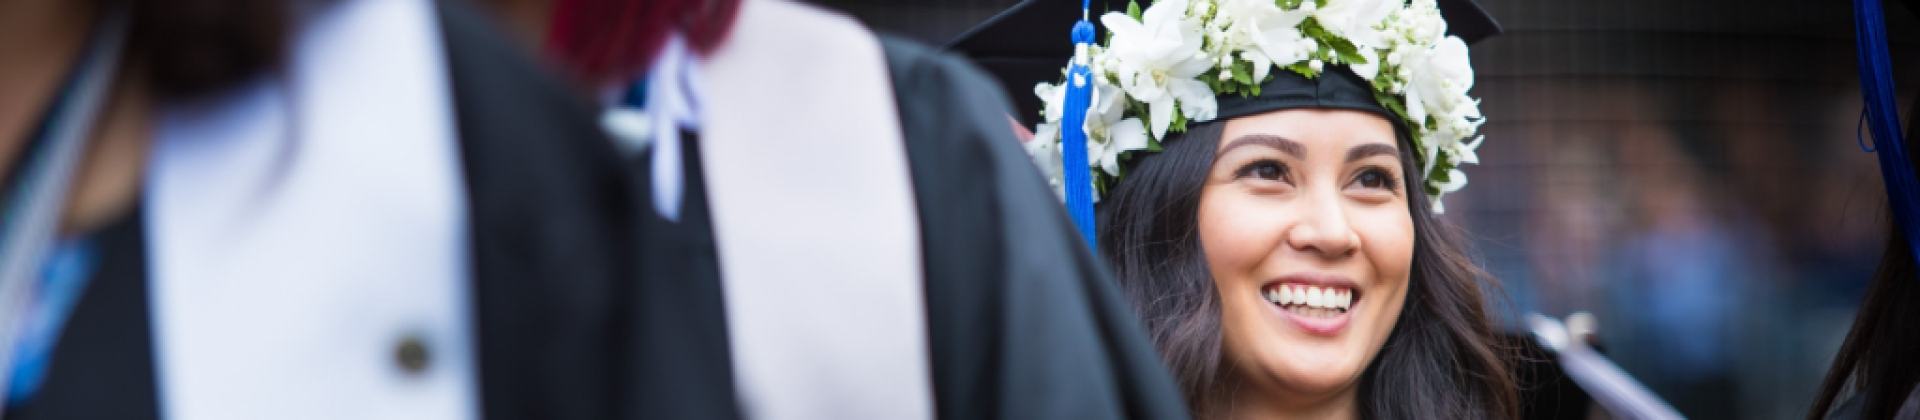 woman in cap and gown smiling off to her left wearing flowers around graduation cap after earning her bachelor's degree